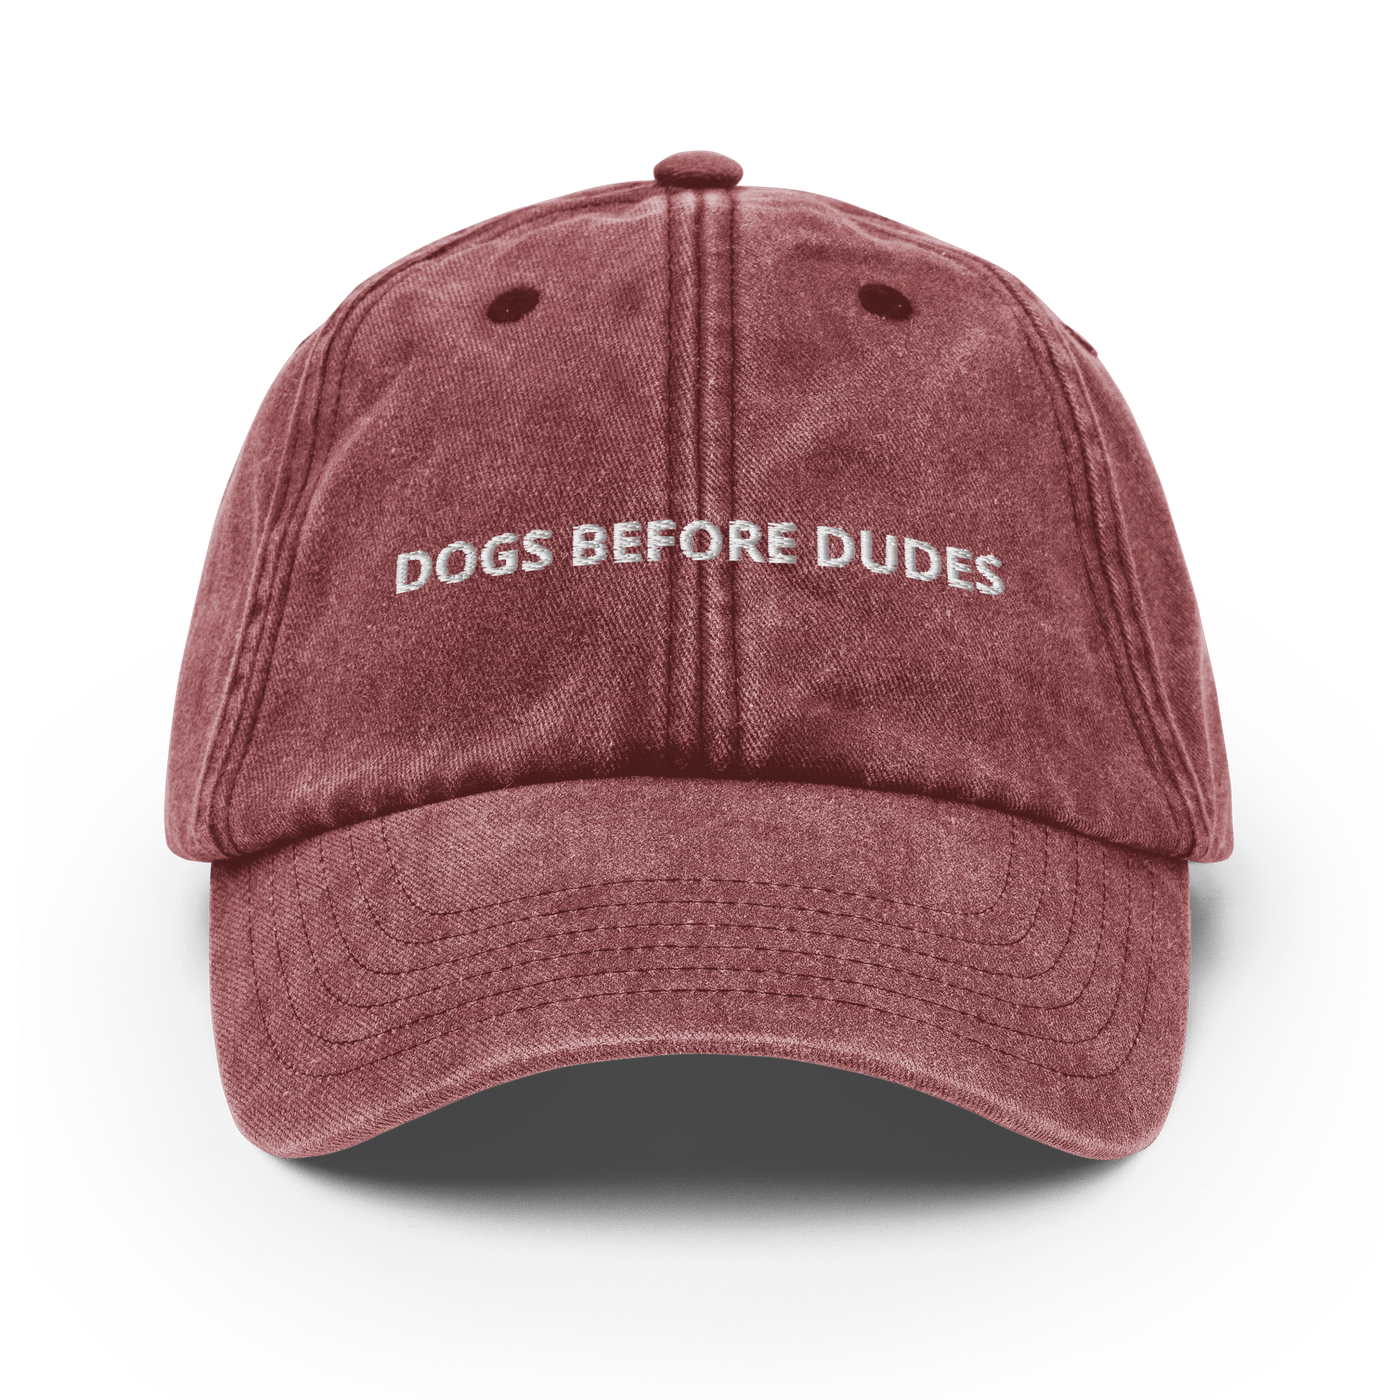 Dogs before Dudes Vintage Hat - Vintage Red - - Just Another Cap Store